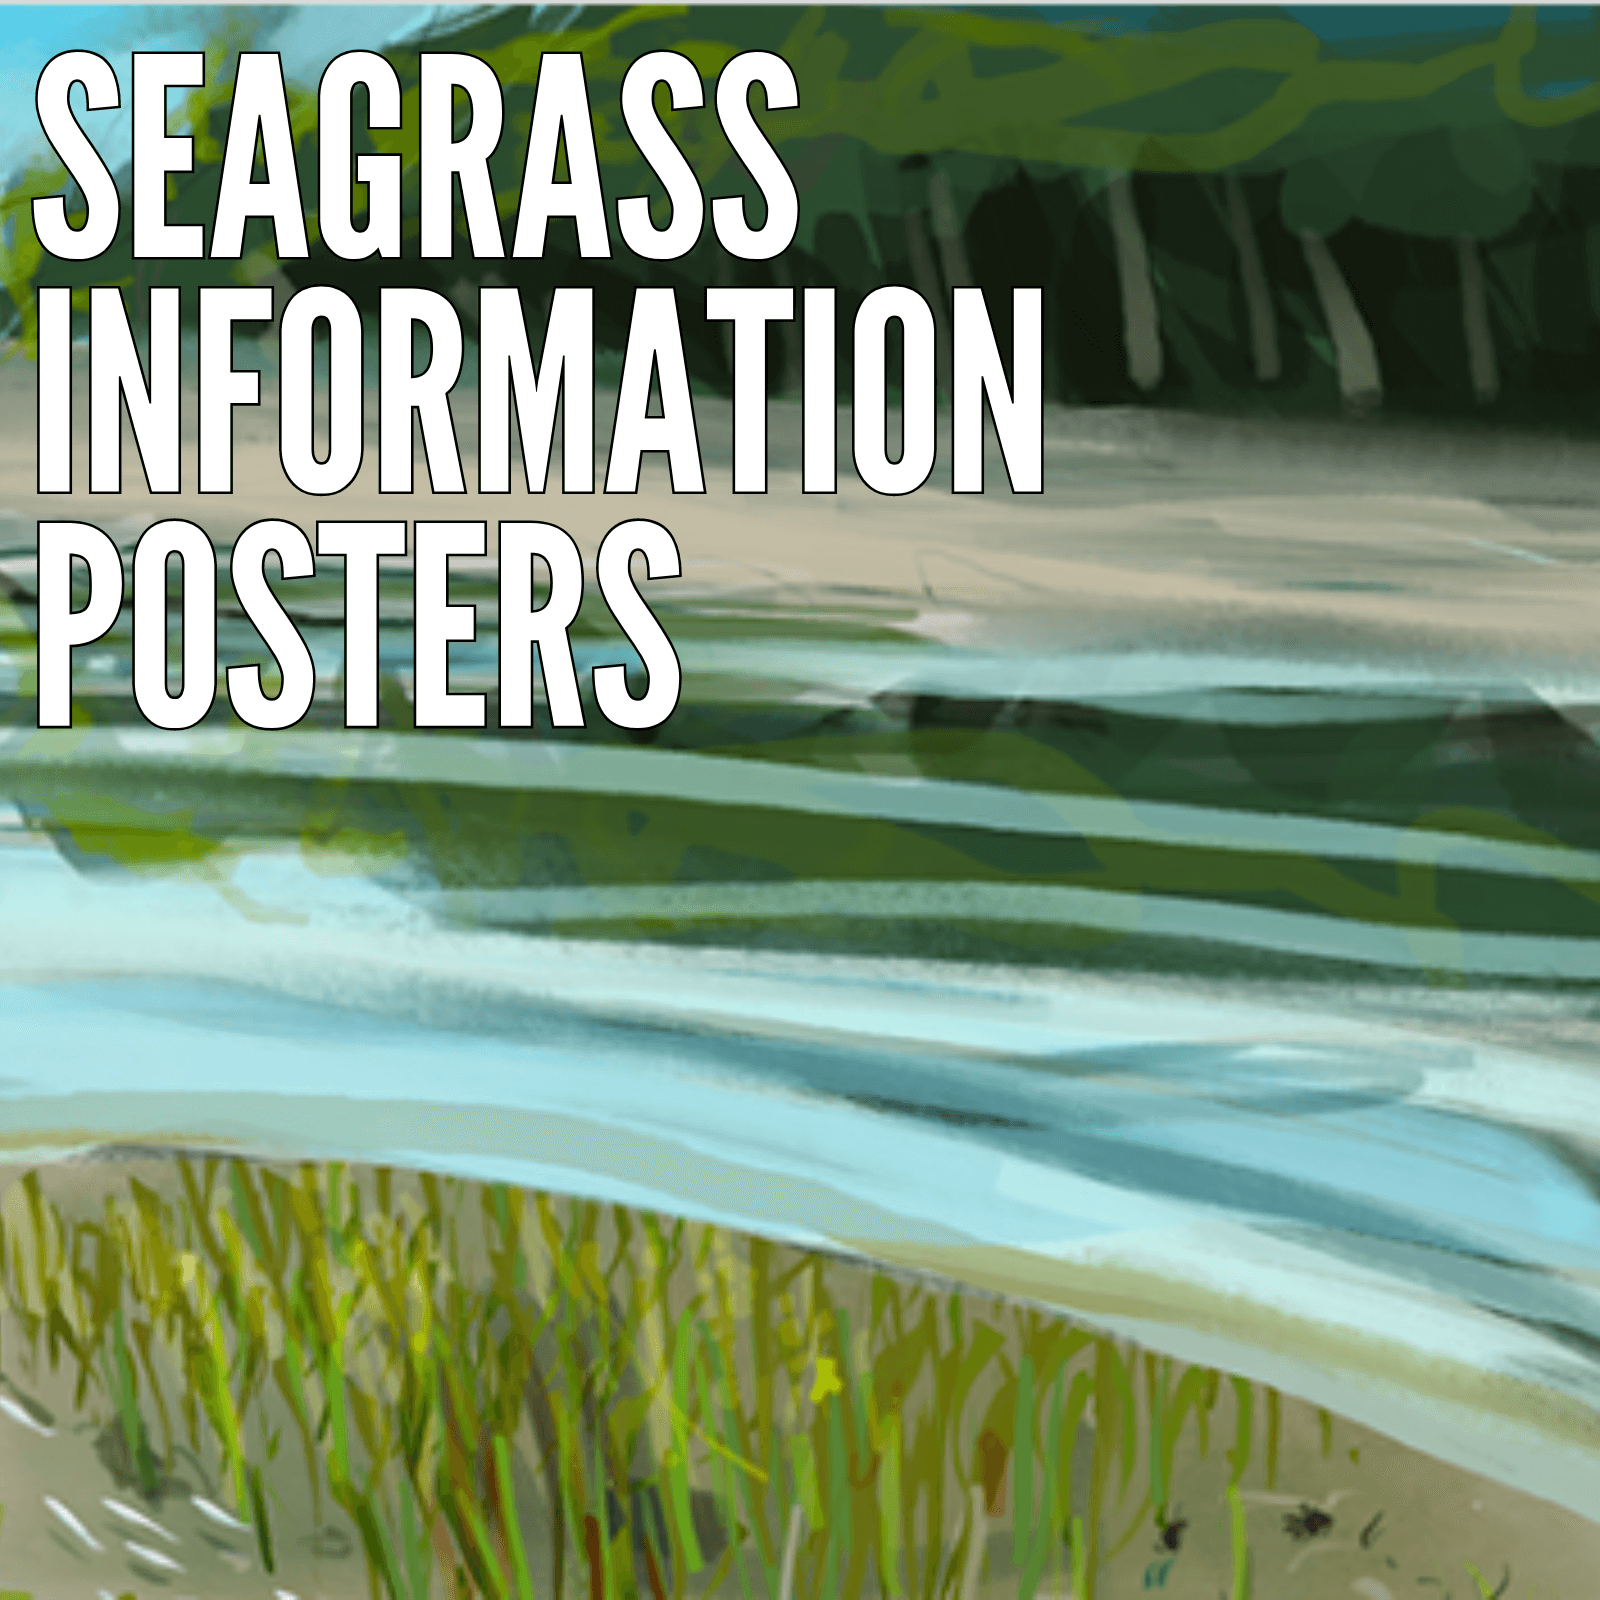 An illustration of seagrass with the text "Seagrass Information Posters" overlayed